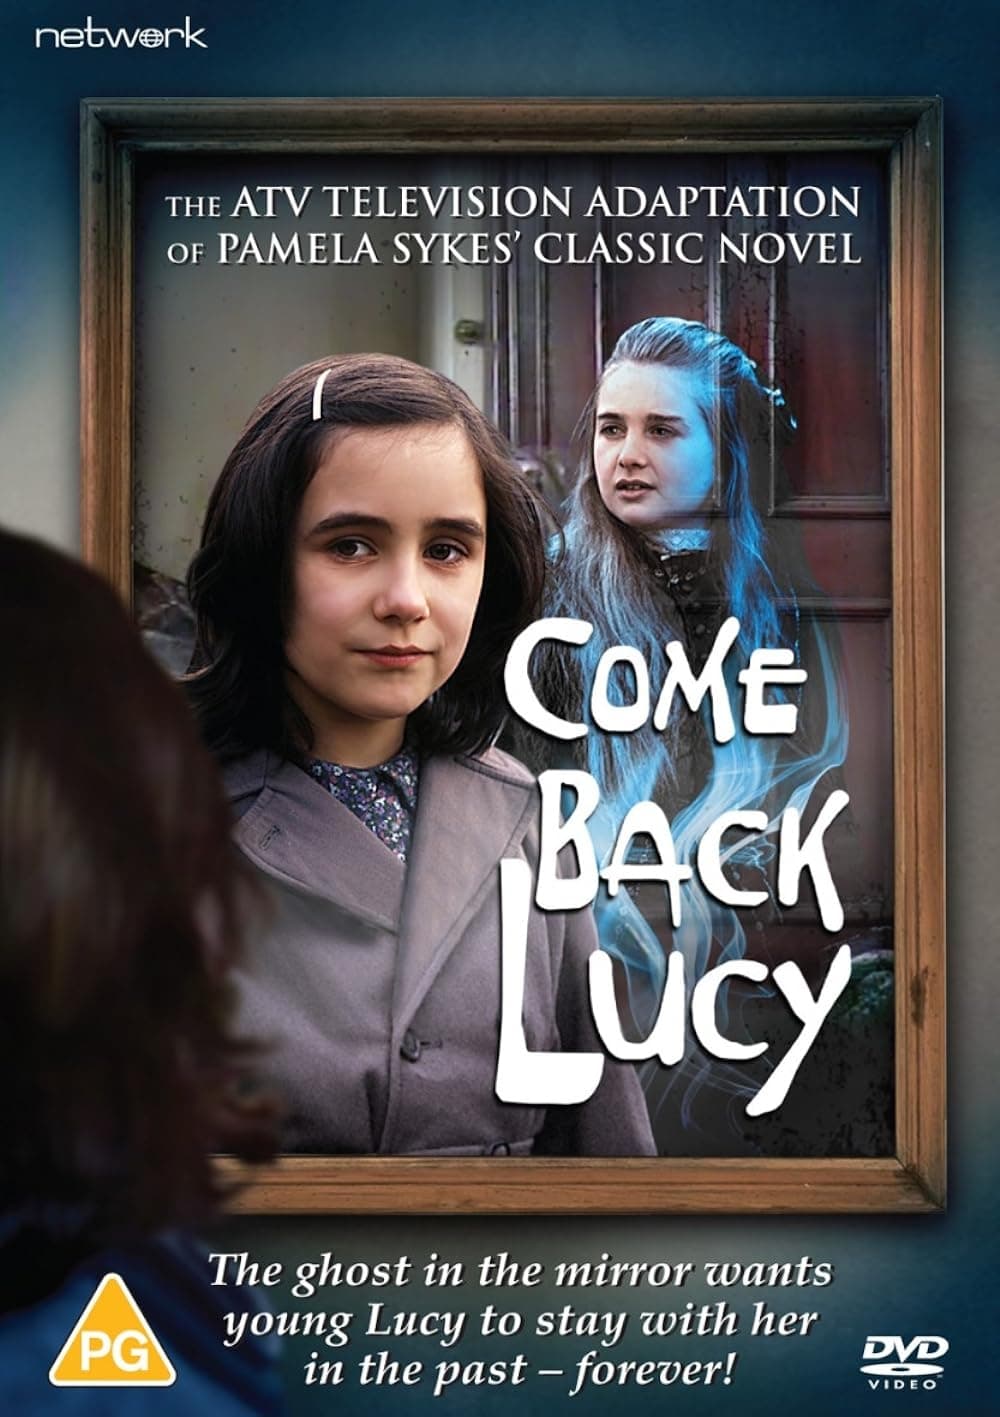 Come Back, Lucy